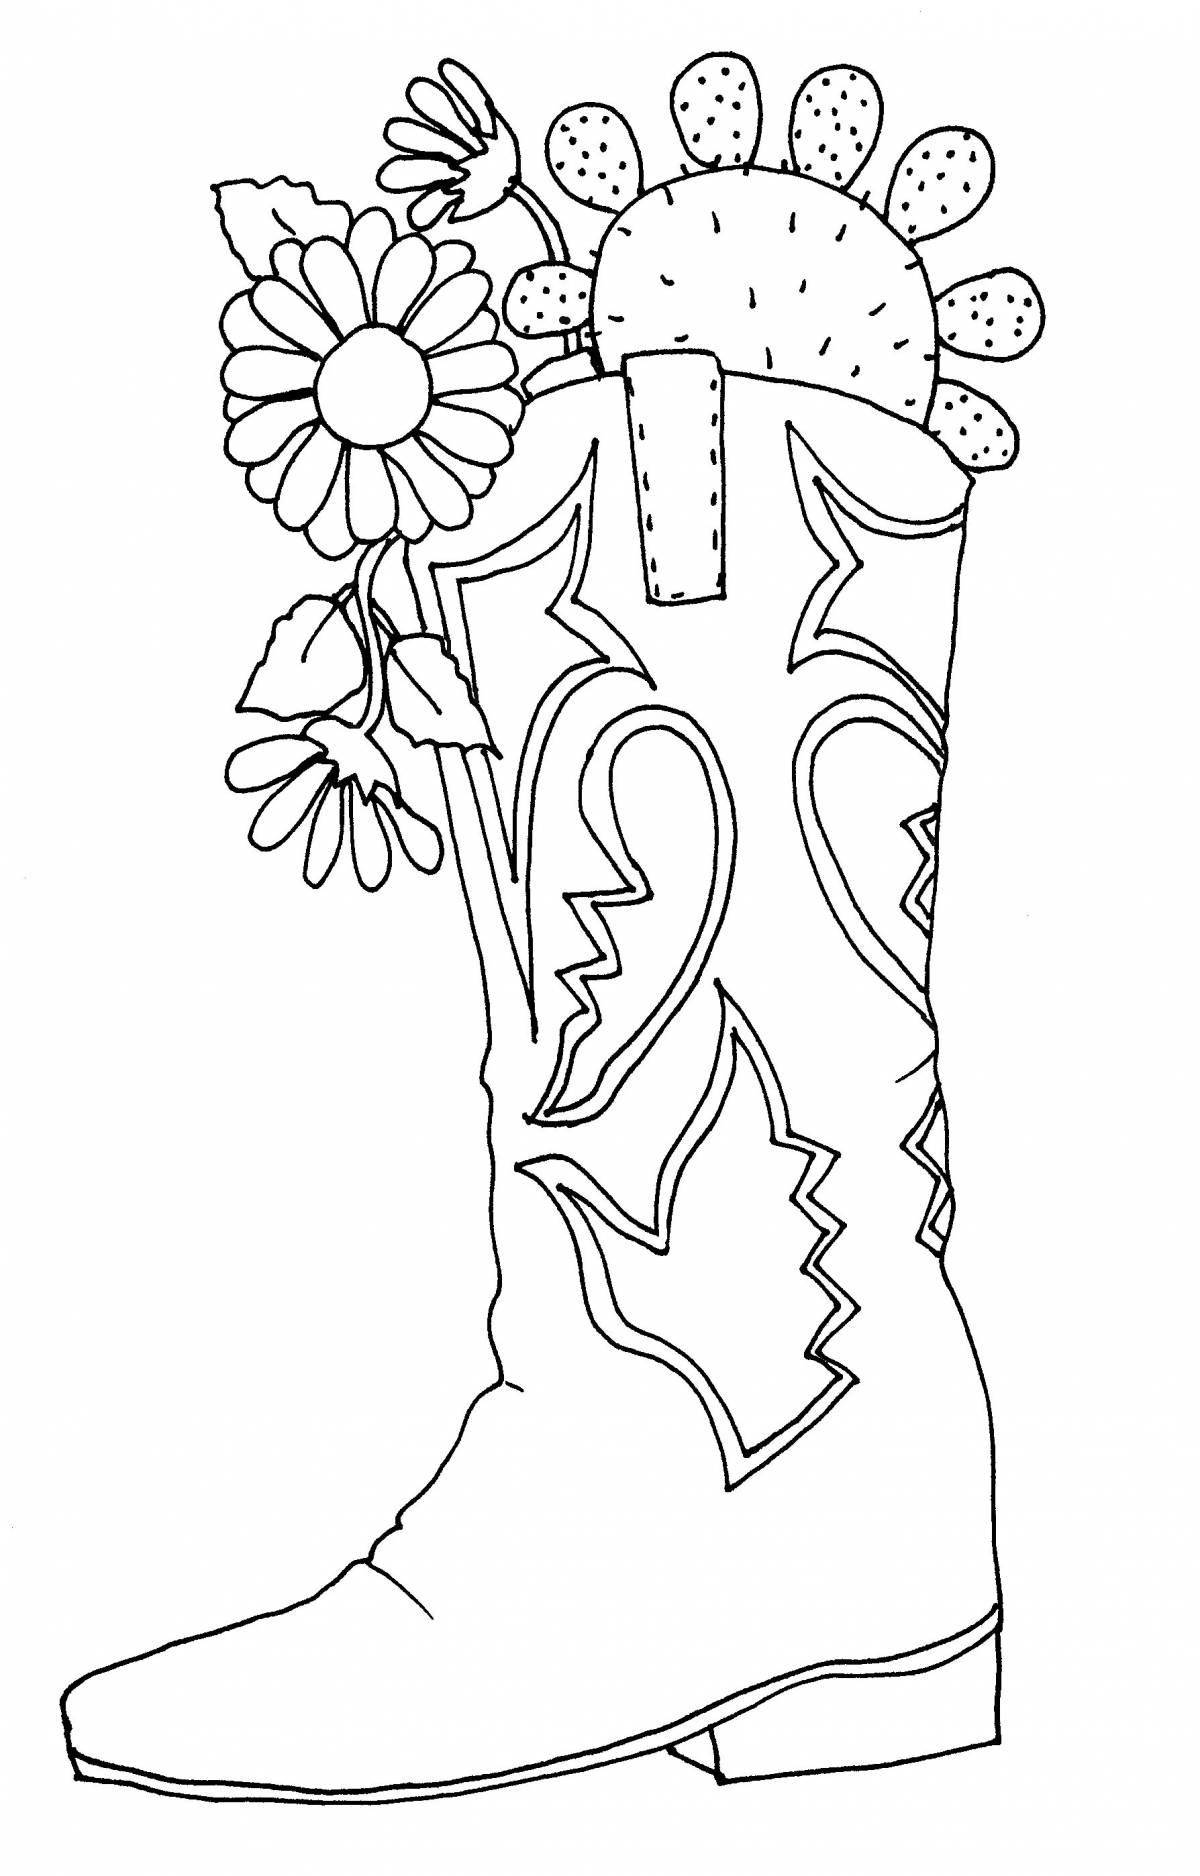 Attractive tatar boot coloring book